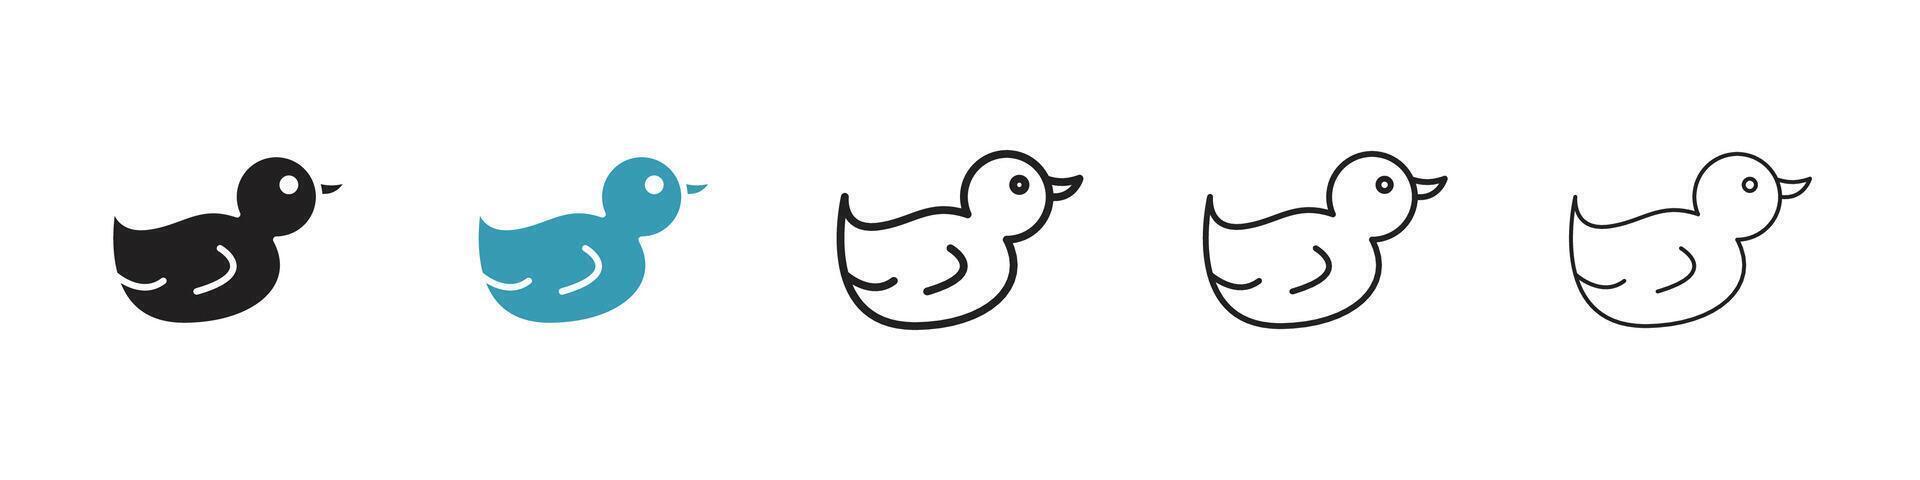 Duck toy icon vector